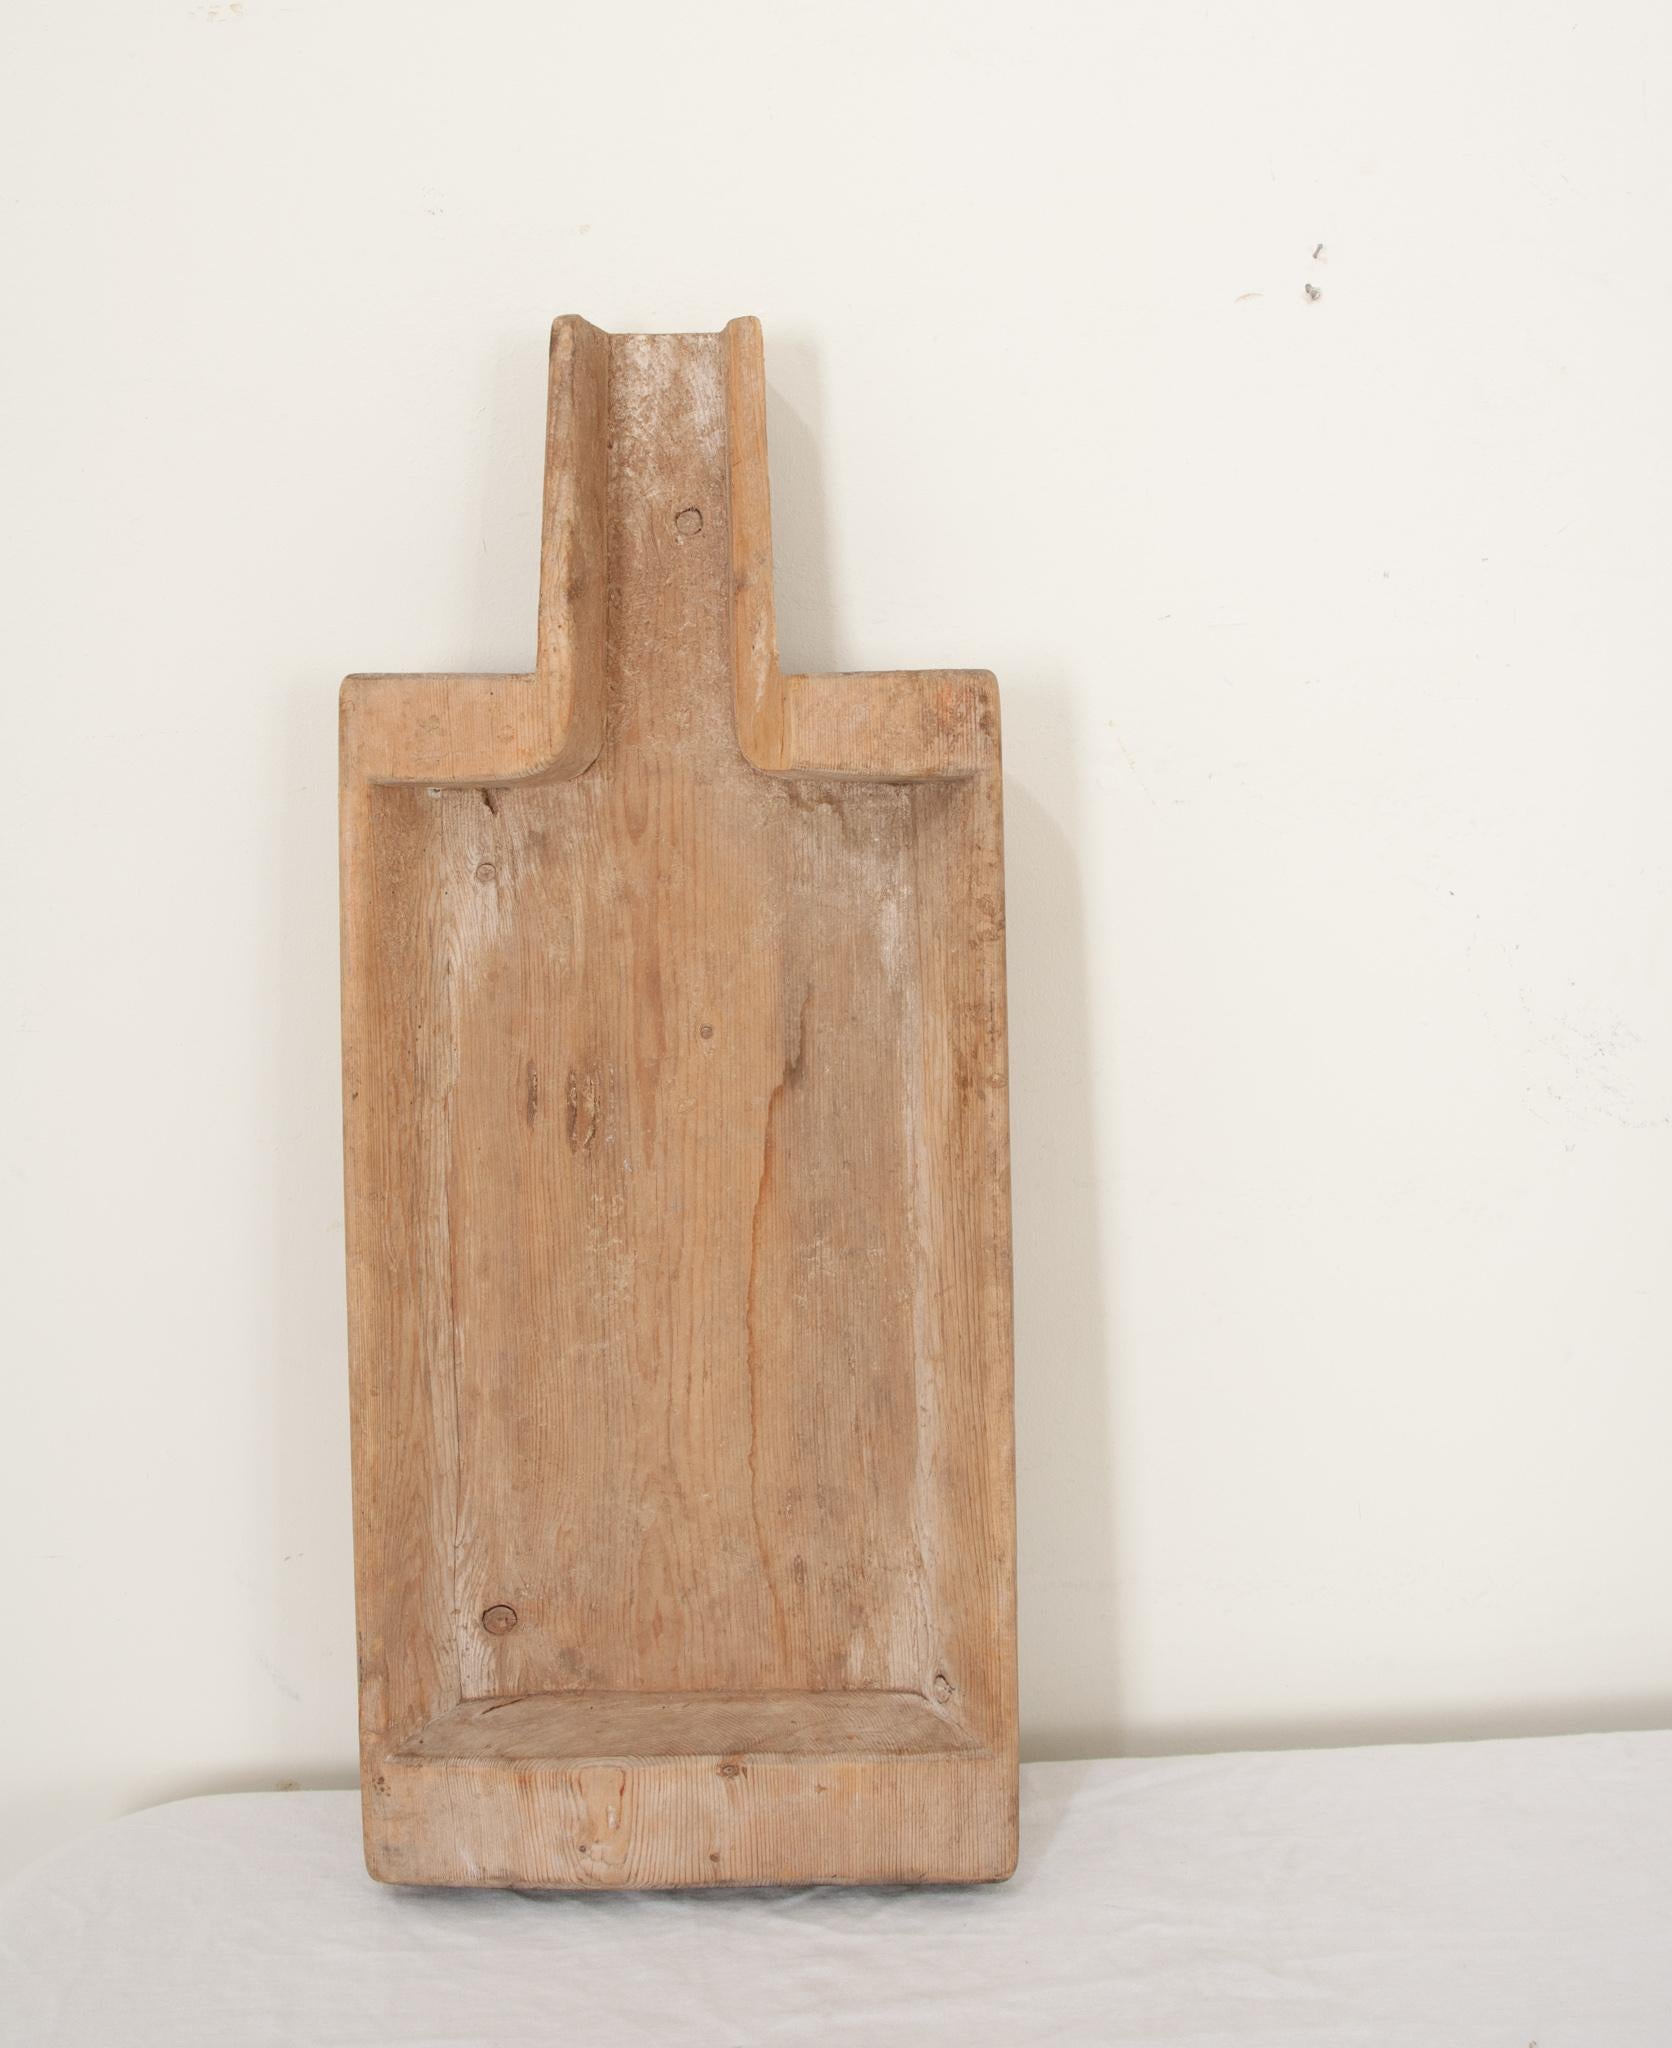 A 19th century Scandinavian cheese maker's board hand-crafted from solid wood circa 1879. Genuine and rustic, this rectangular hollowed out,  paddle shaped board was used for draining and separating the cheese and whey. Made of a solid plank of